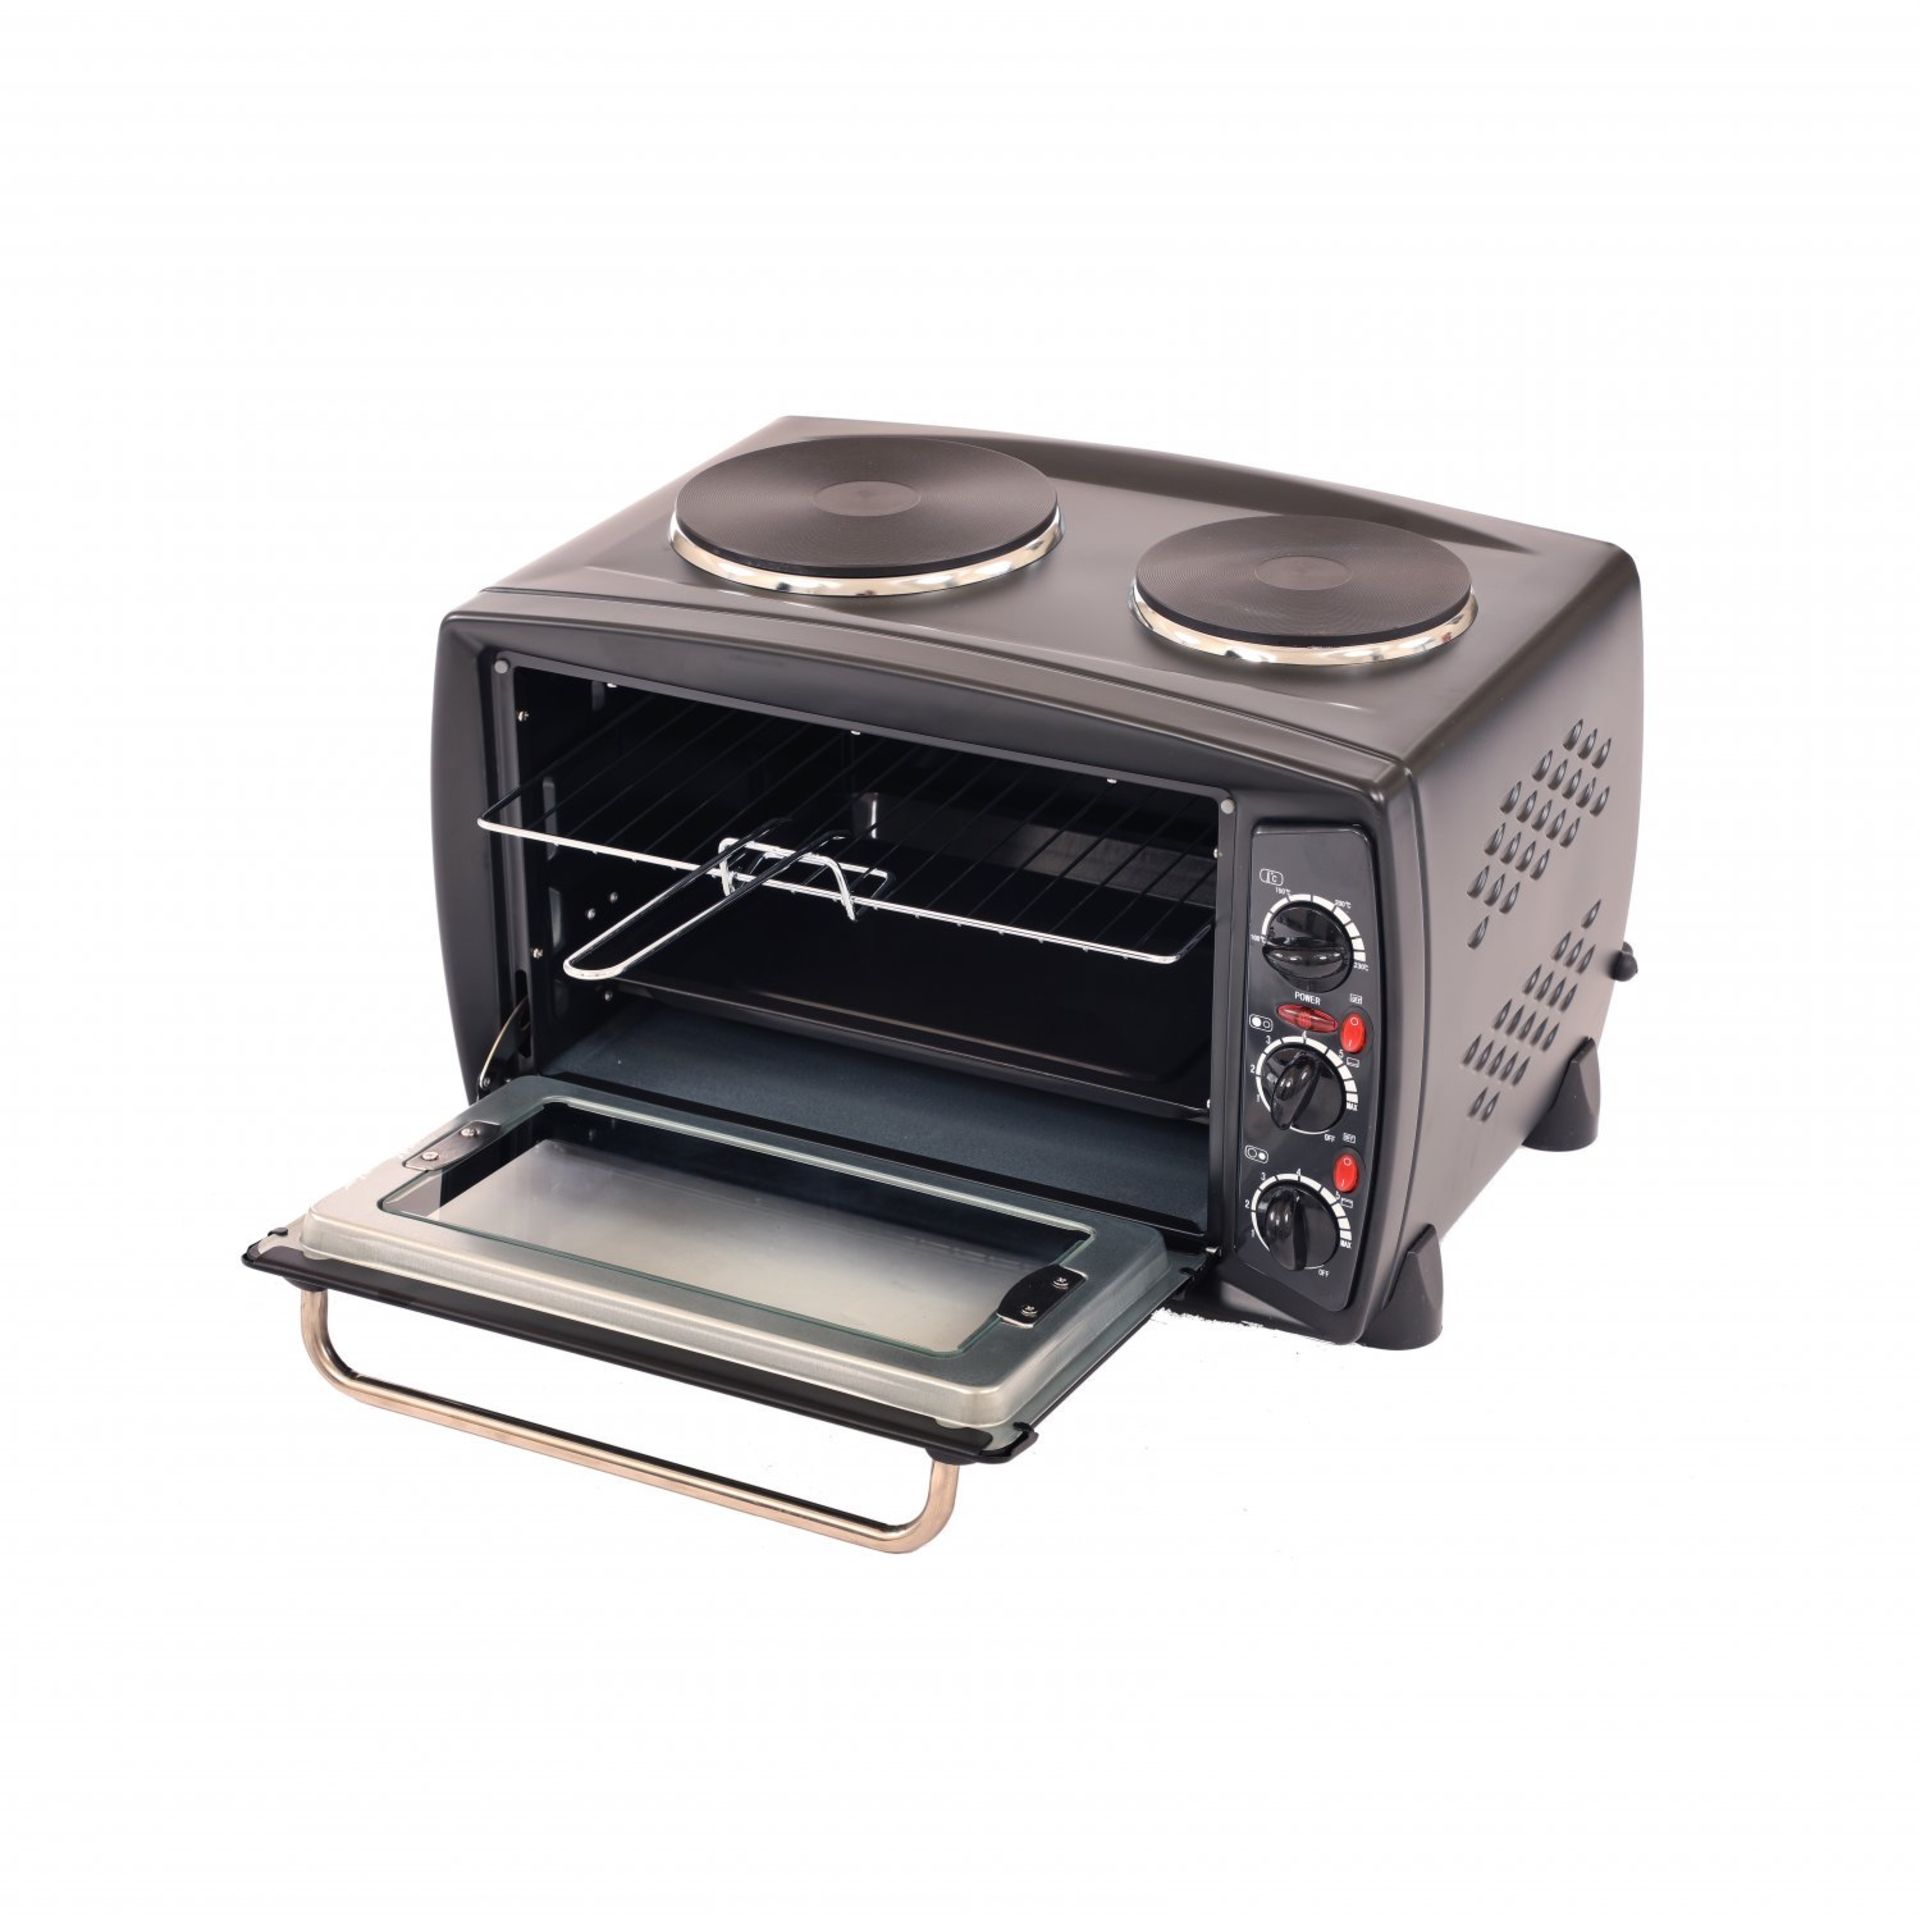 (LF52) Mini Oven c/w Hot Plates And Grill The 26 litre mini oven & grill with double hob is ... - Image 2 of 2